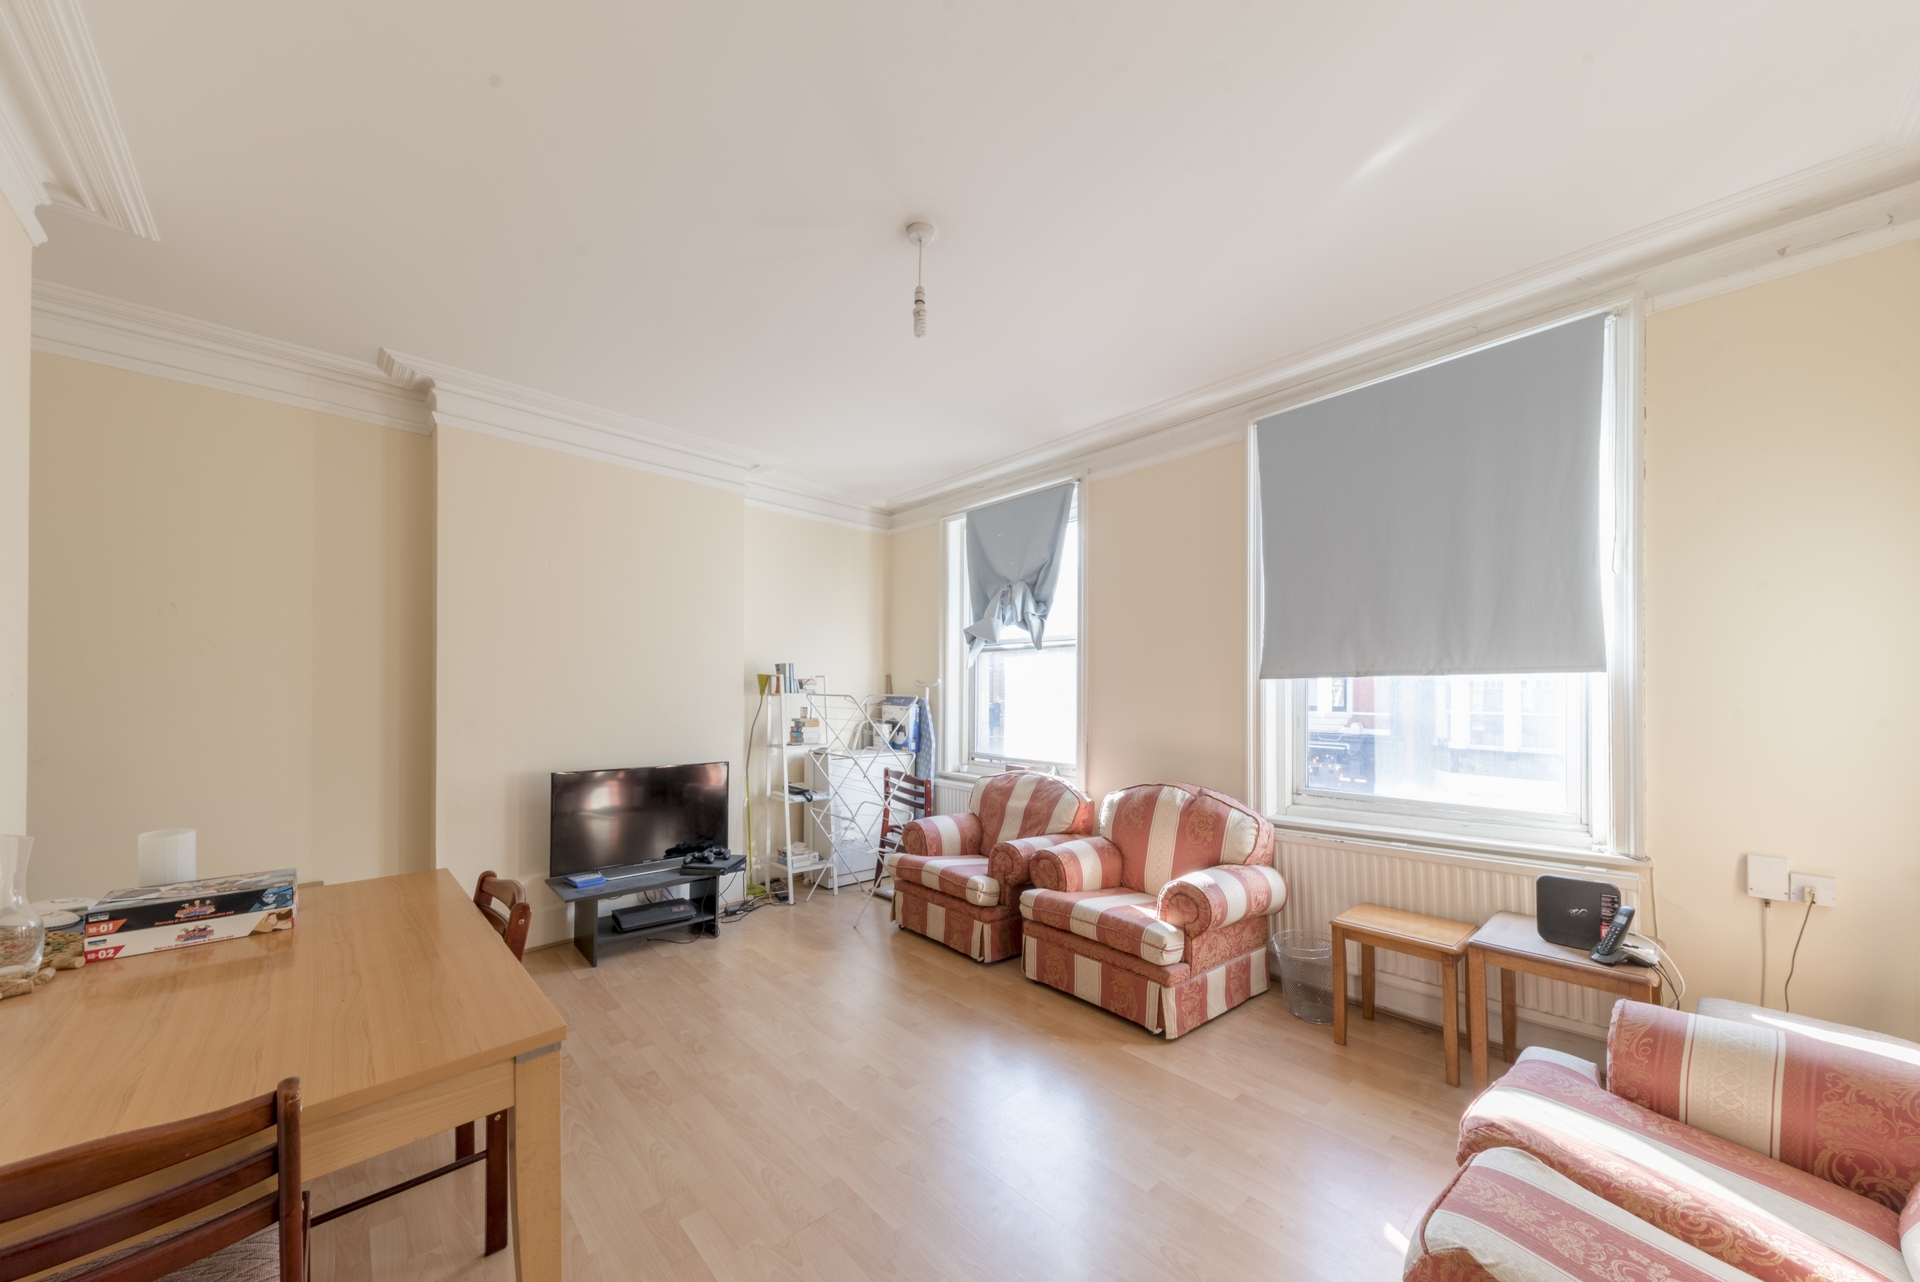 Room To Let to rent in West Hampstead, London, NW6